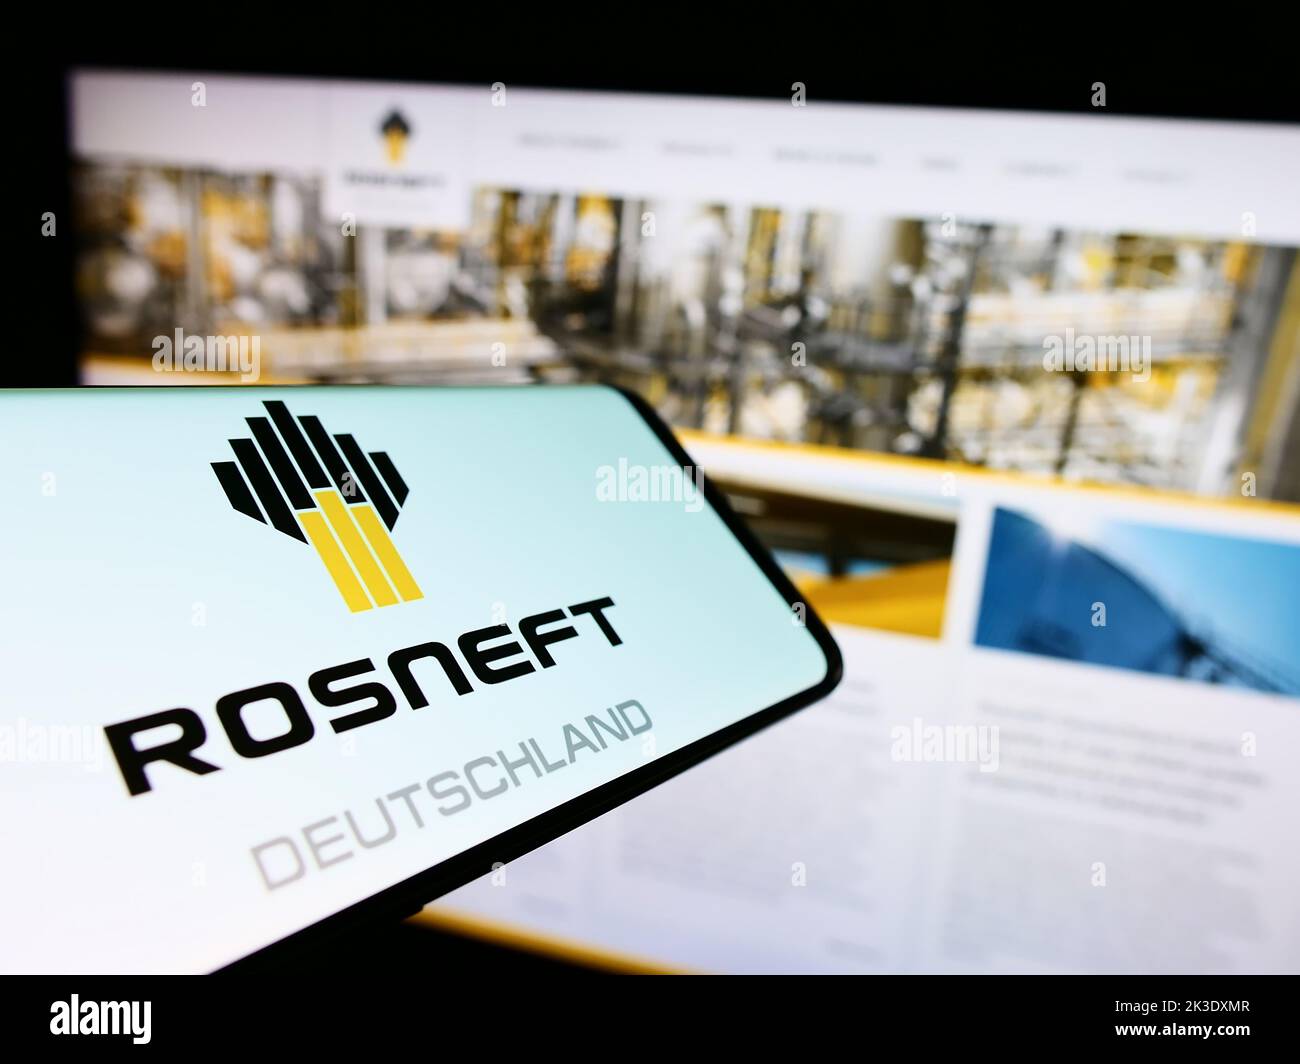 Cellphone with logo of oil refining company Rosneft Deutschland GmbH on screen in front of website. Focus on center-right of phone display. Stock Photo